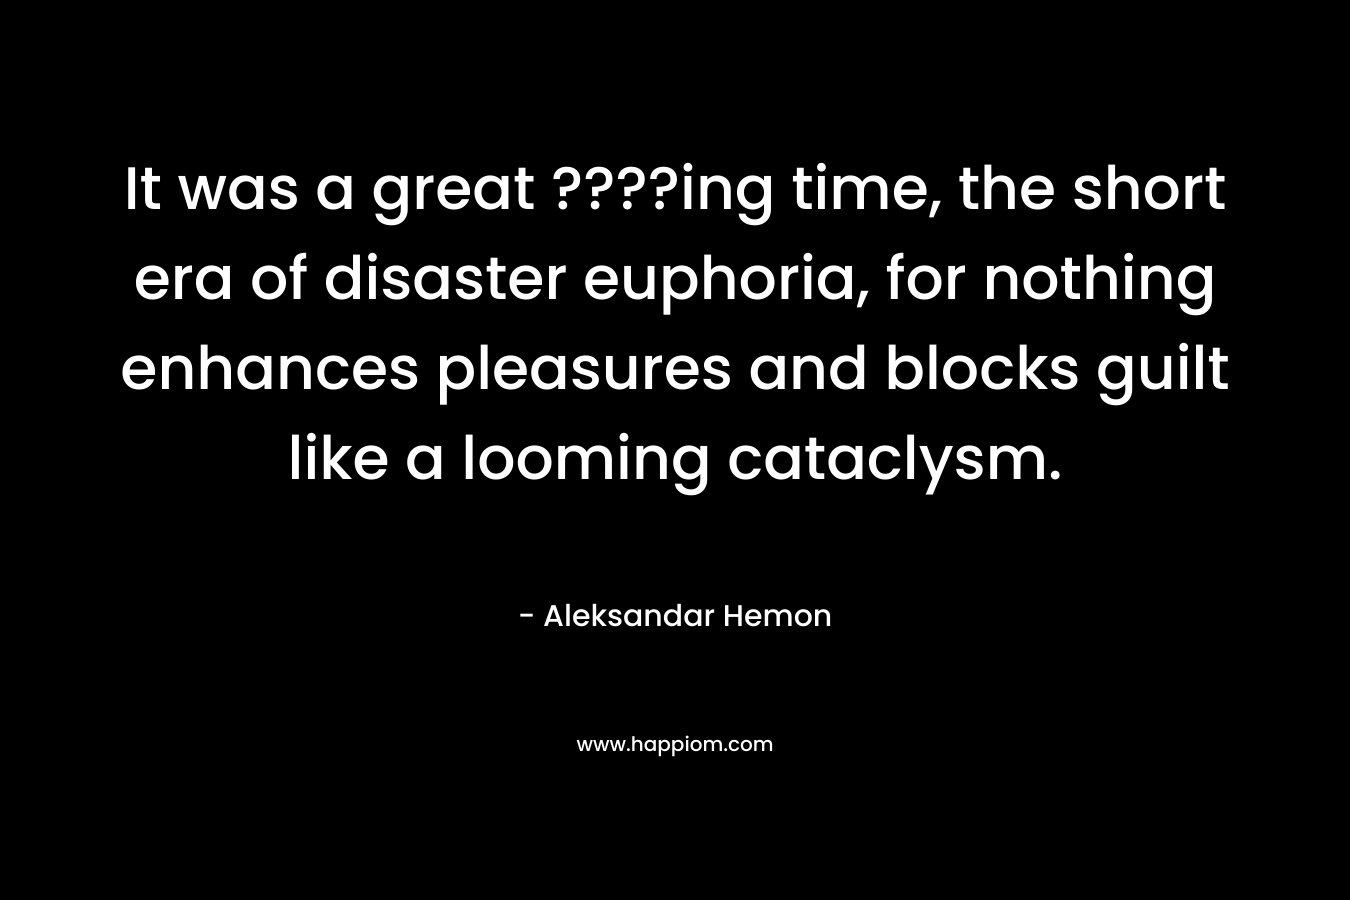 It was a great ????ing time, the short era of disaster euphoria, for nothing enhances pleasures and blocks guilt like a looming cataclysm. – Aleksandar Hemon